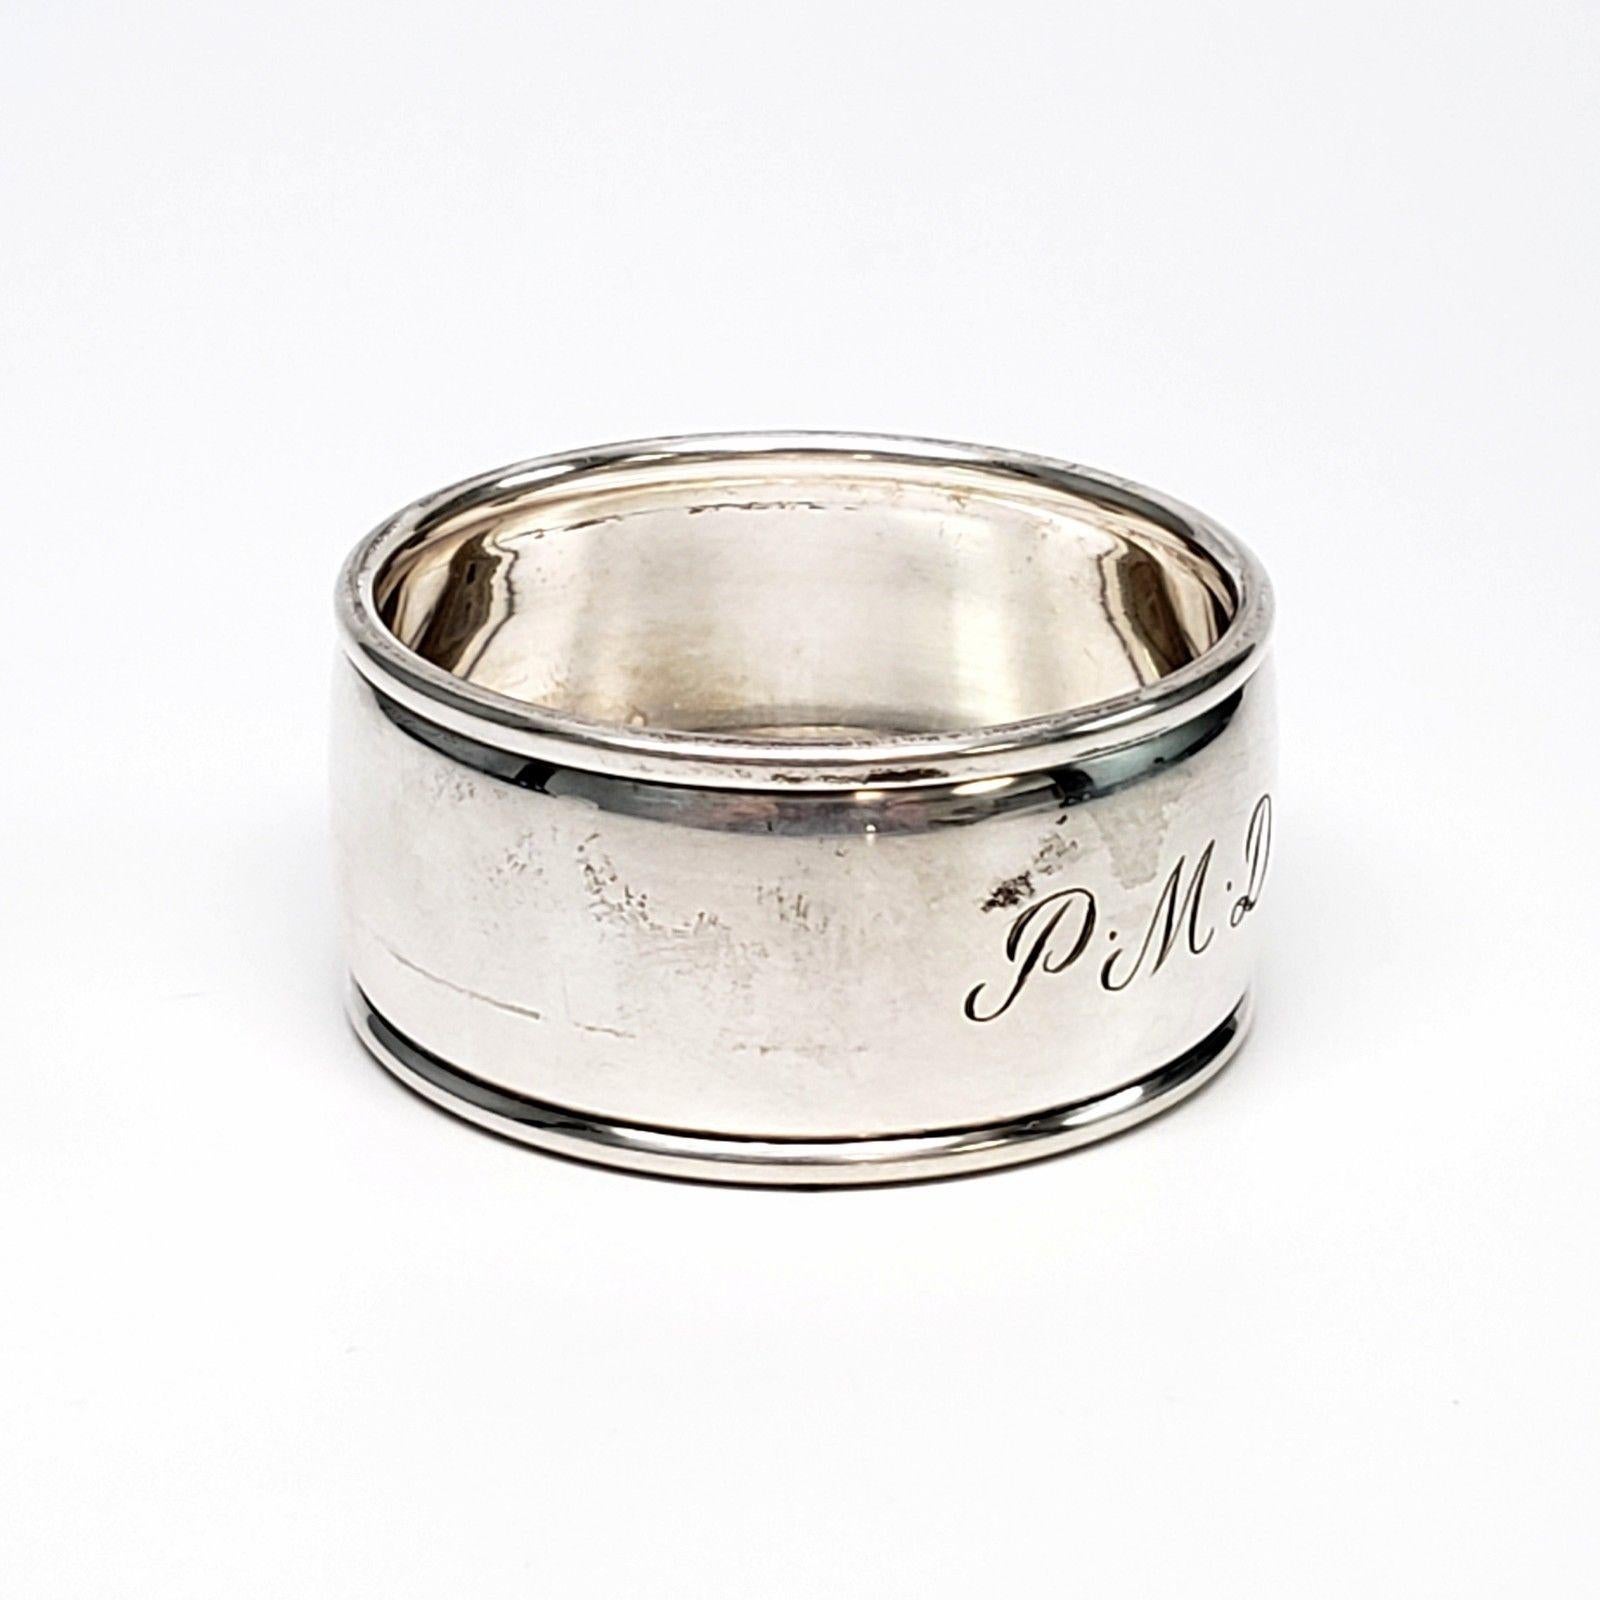 American Tiffany & Co. Sterling Silver Napkin Ring with Monogram